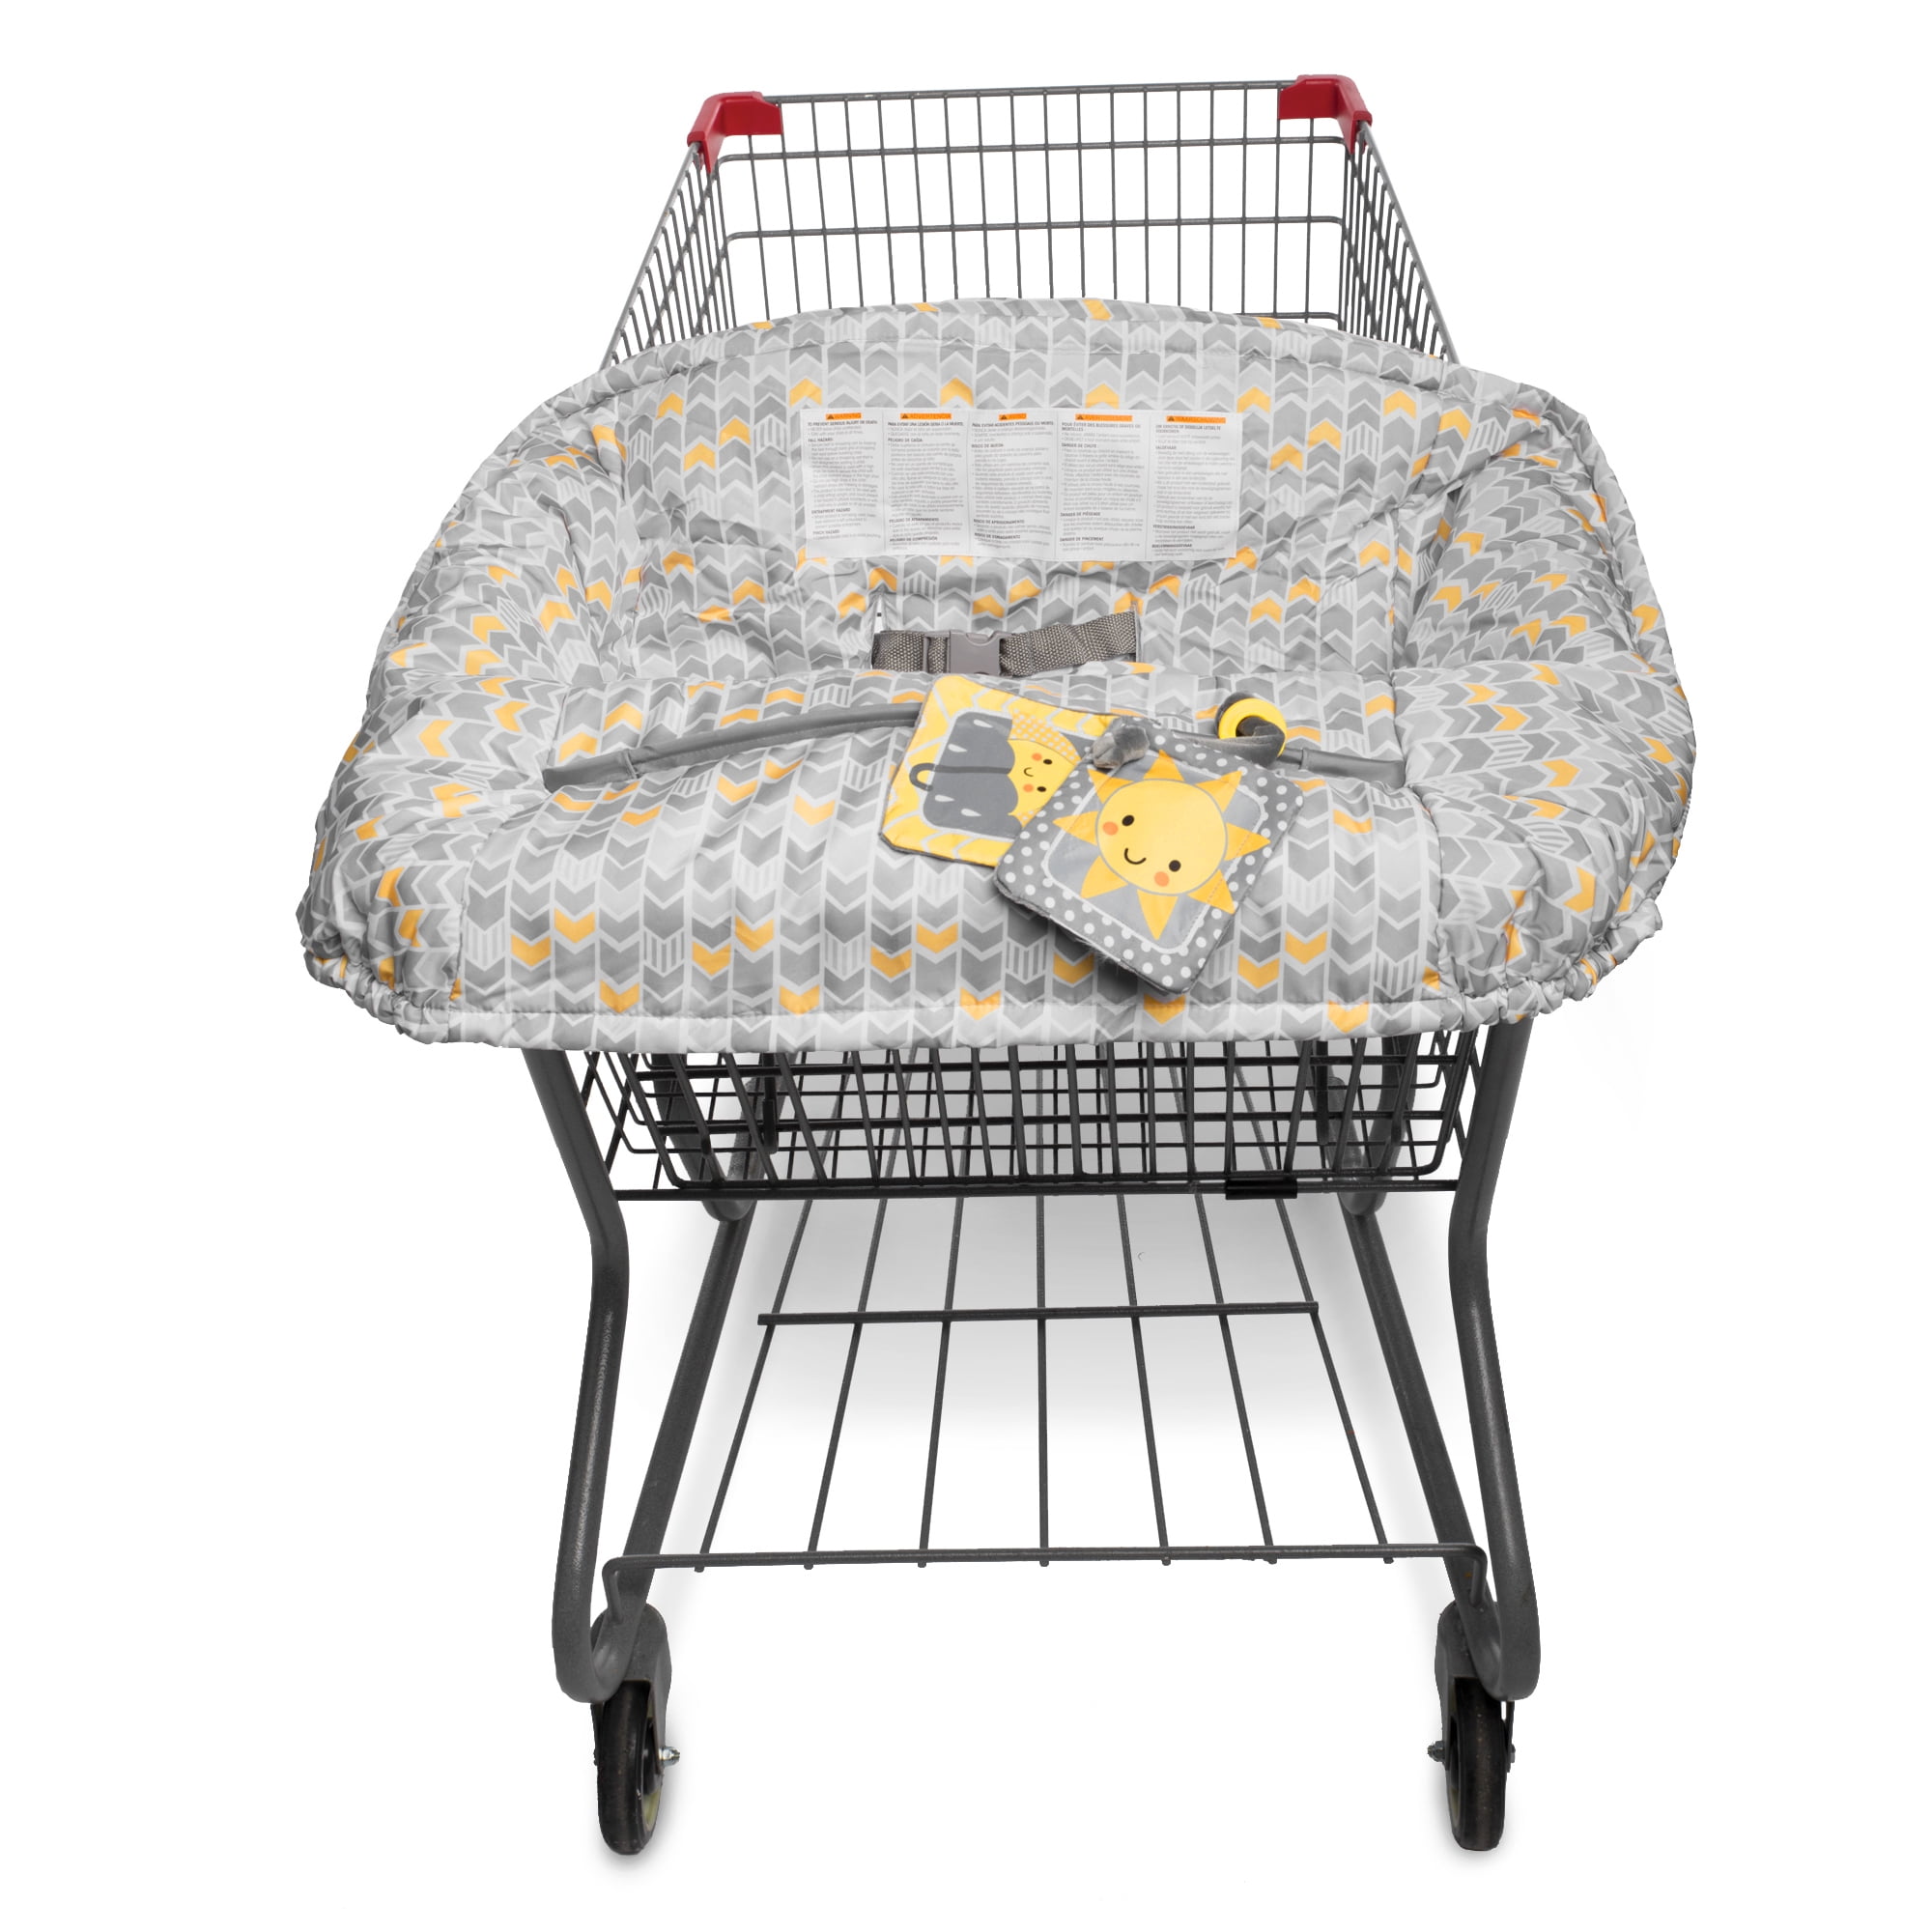 Protects Against Germs Soft Comfort Cushioning Harness System Unisex Gray Universal Size Baby Shopping Cart Cover & High Chair Cover